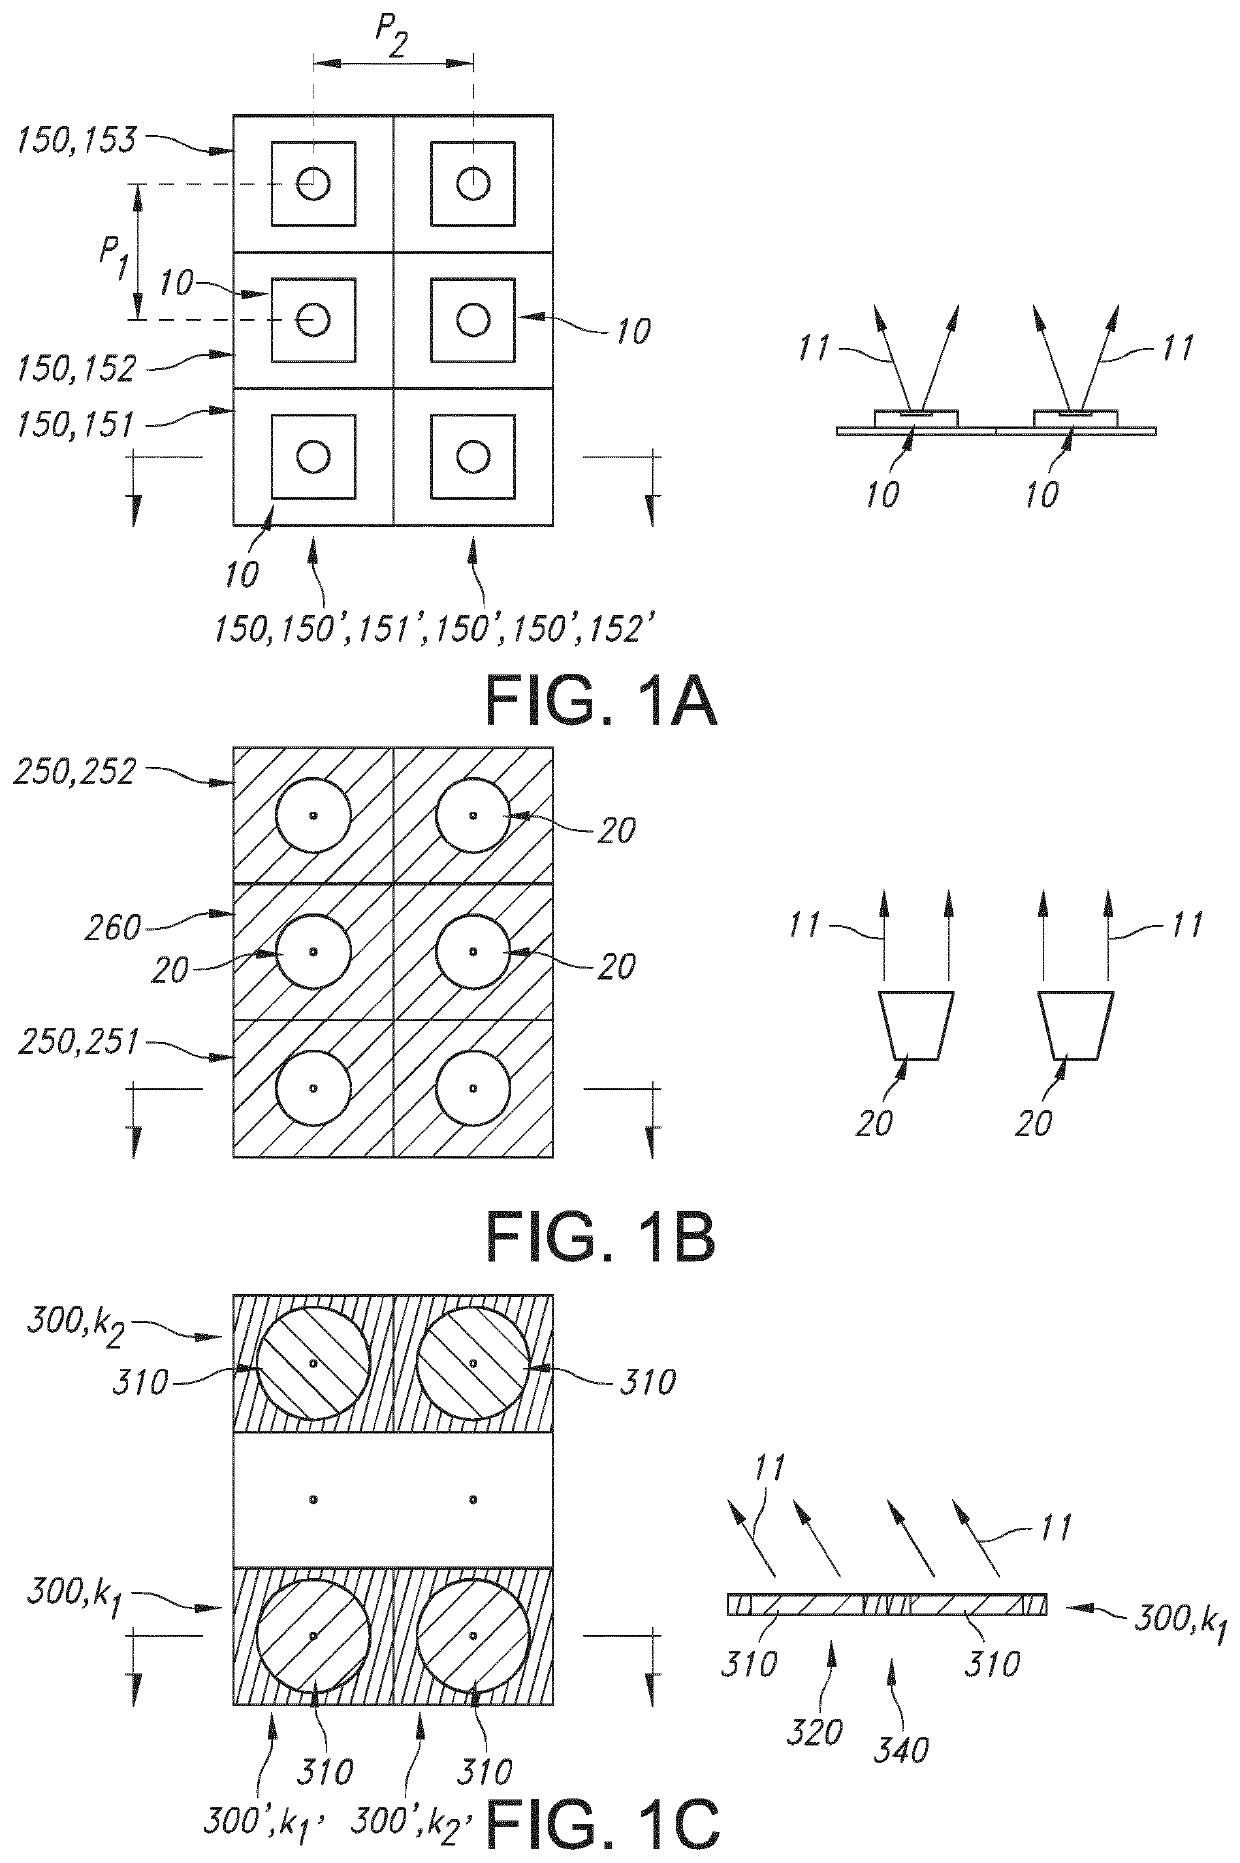 Directional LED array with optical foil structure to redirect light